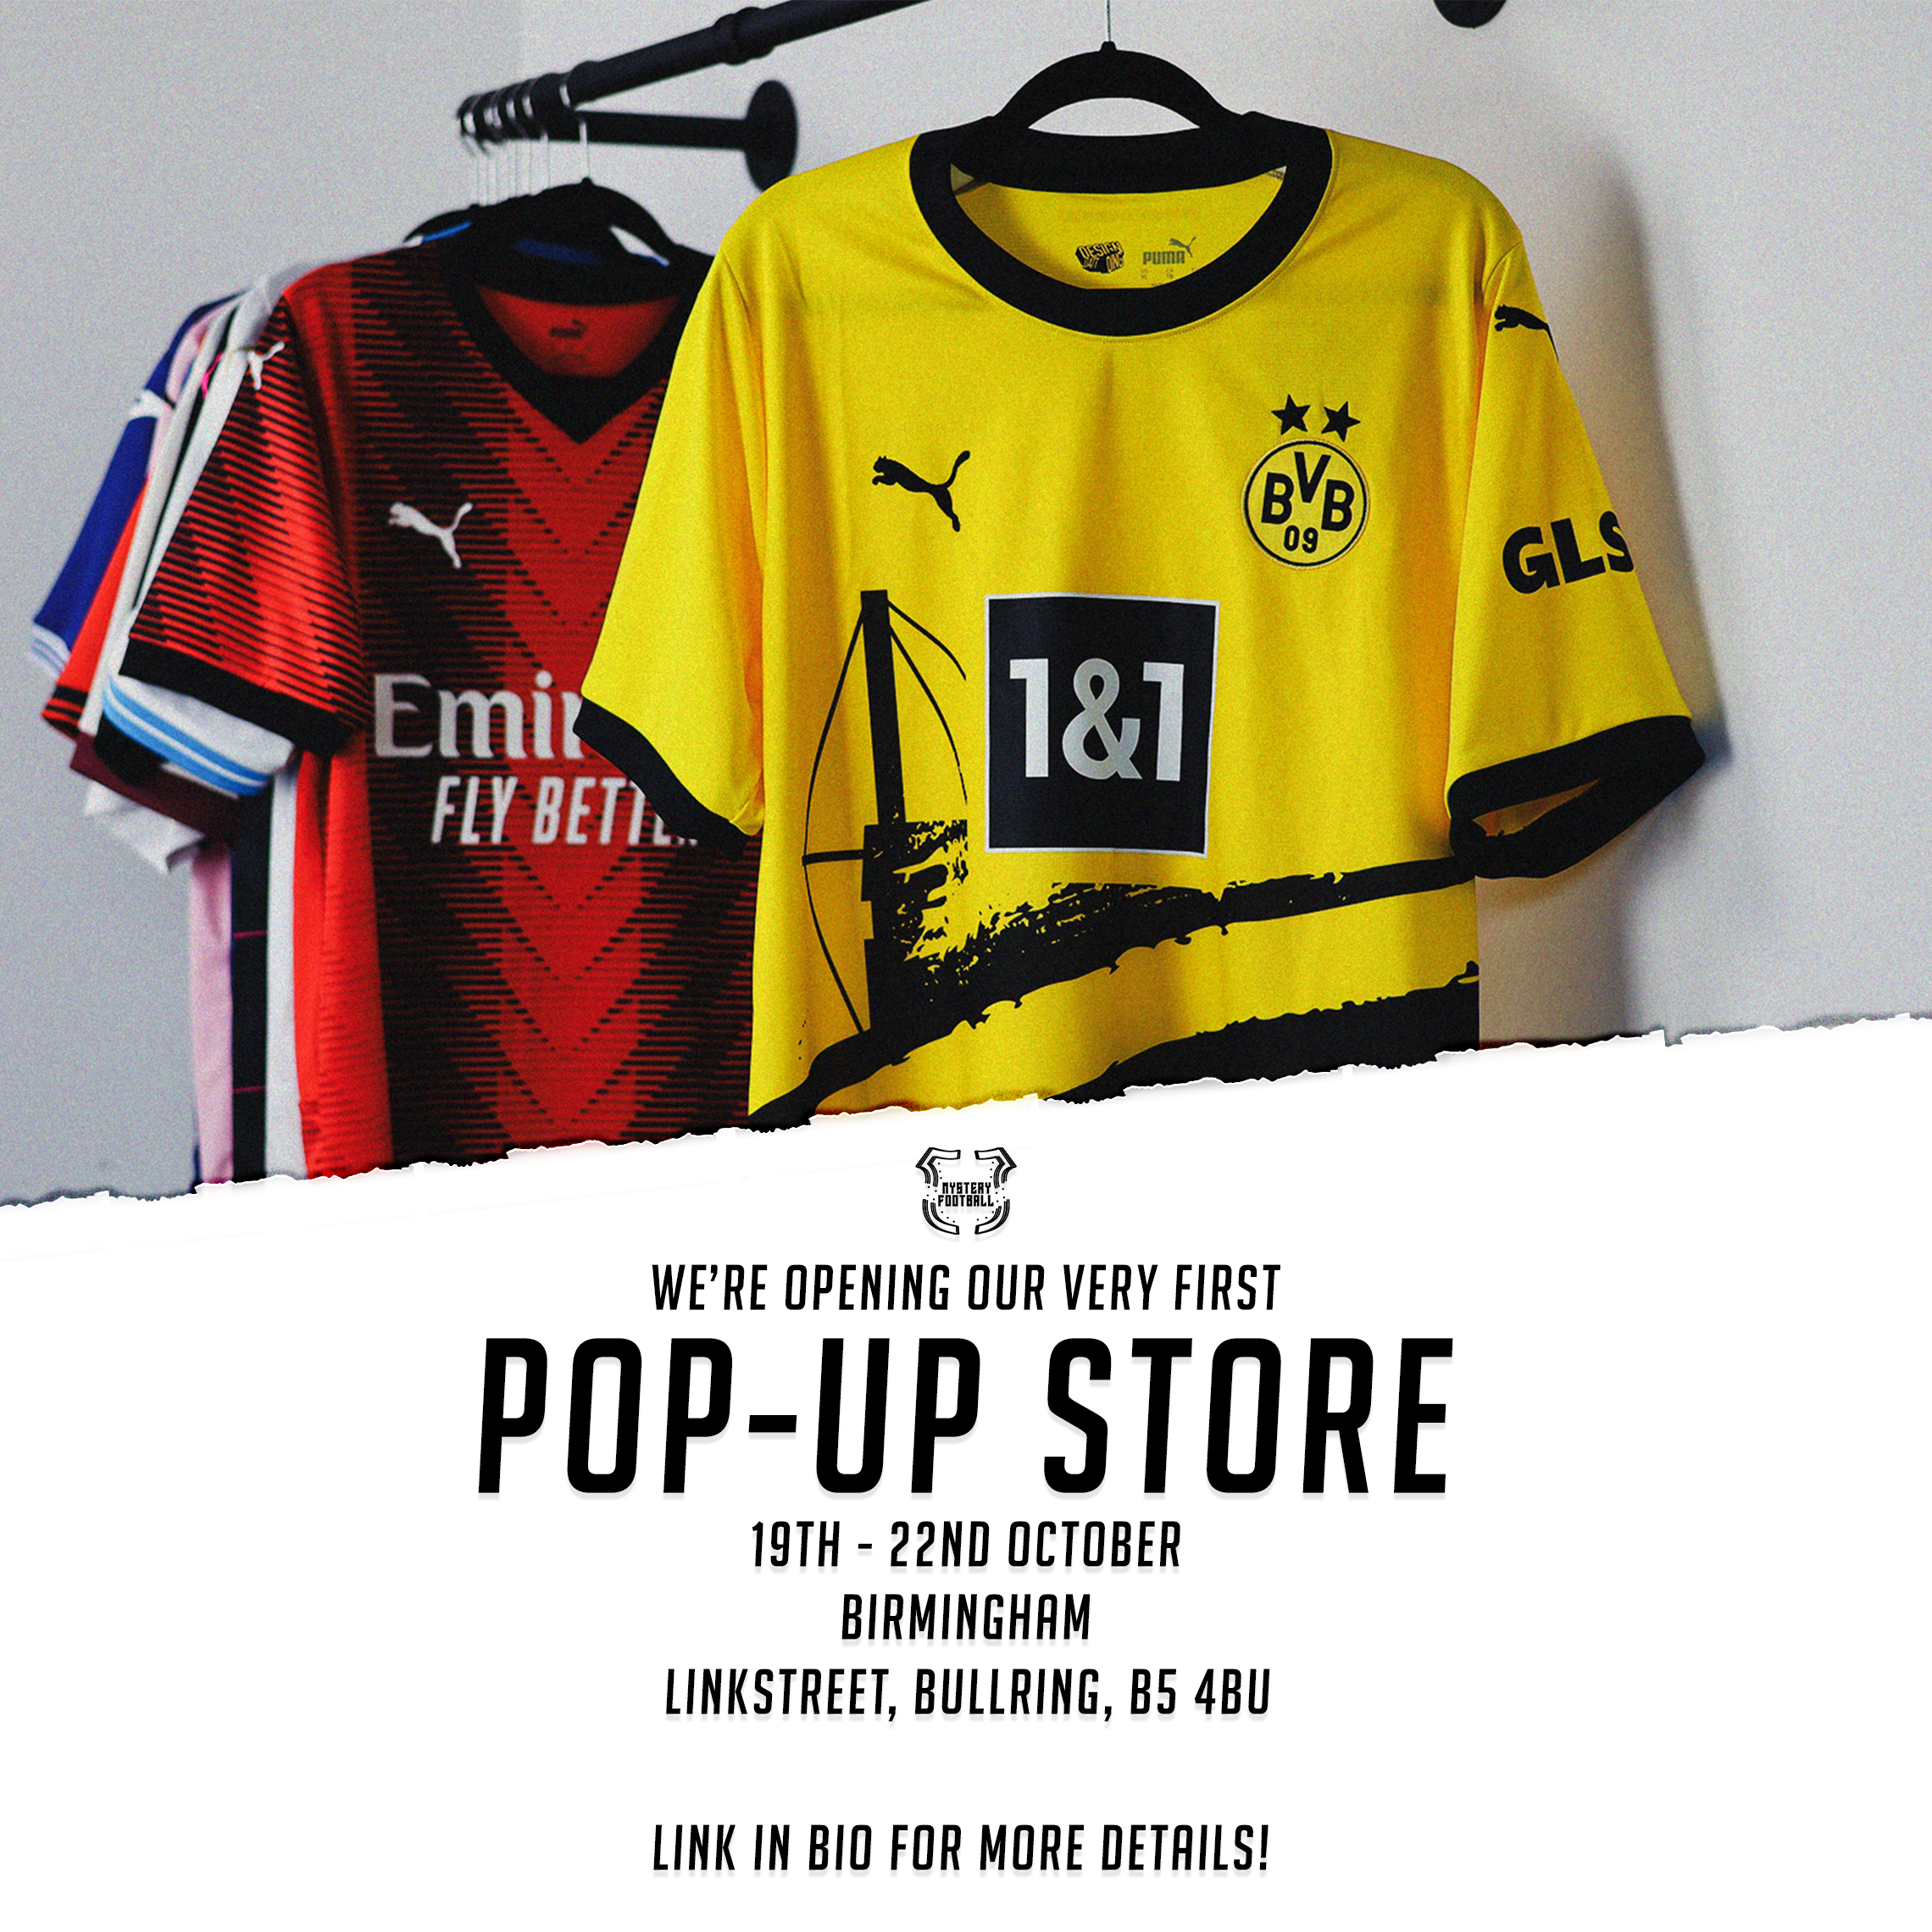 Classic Football Shirts creates unique and immersive pop-up